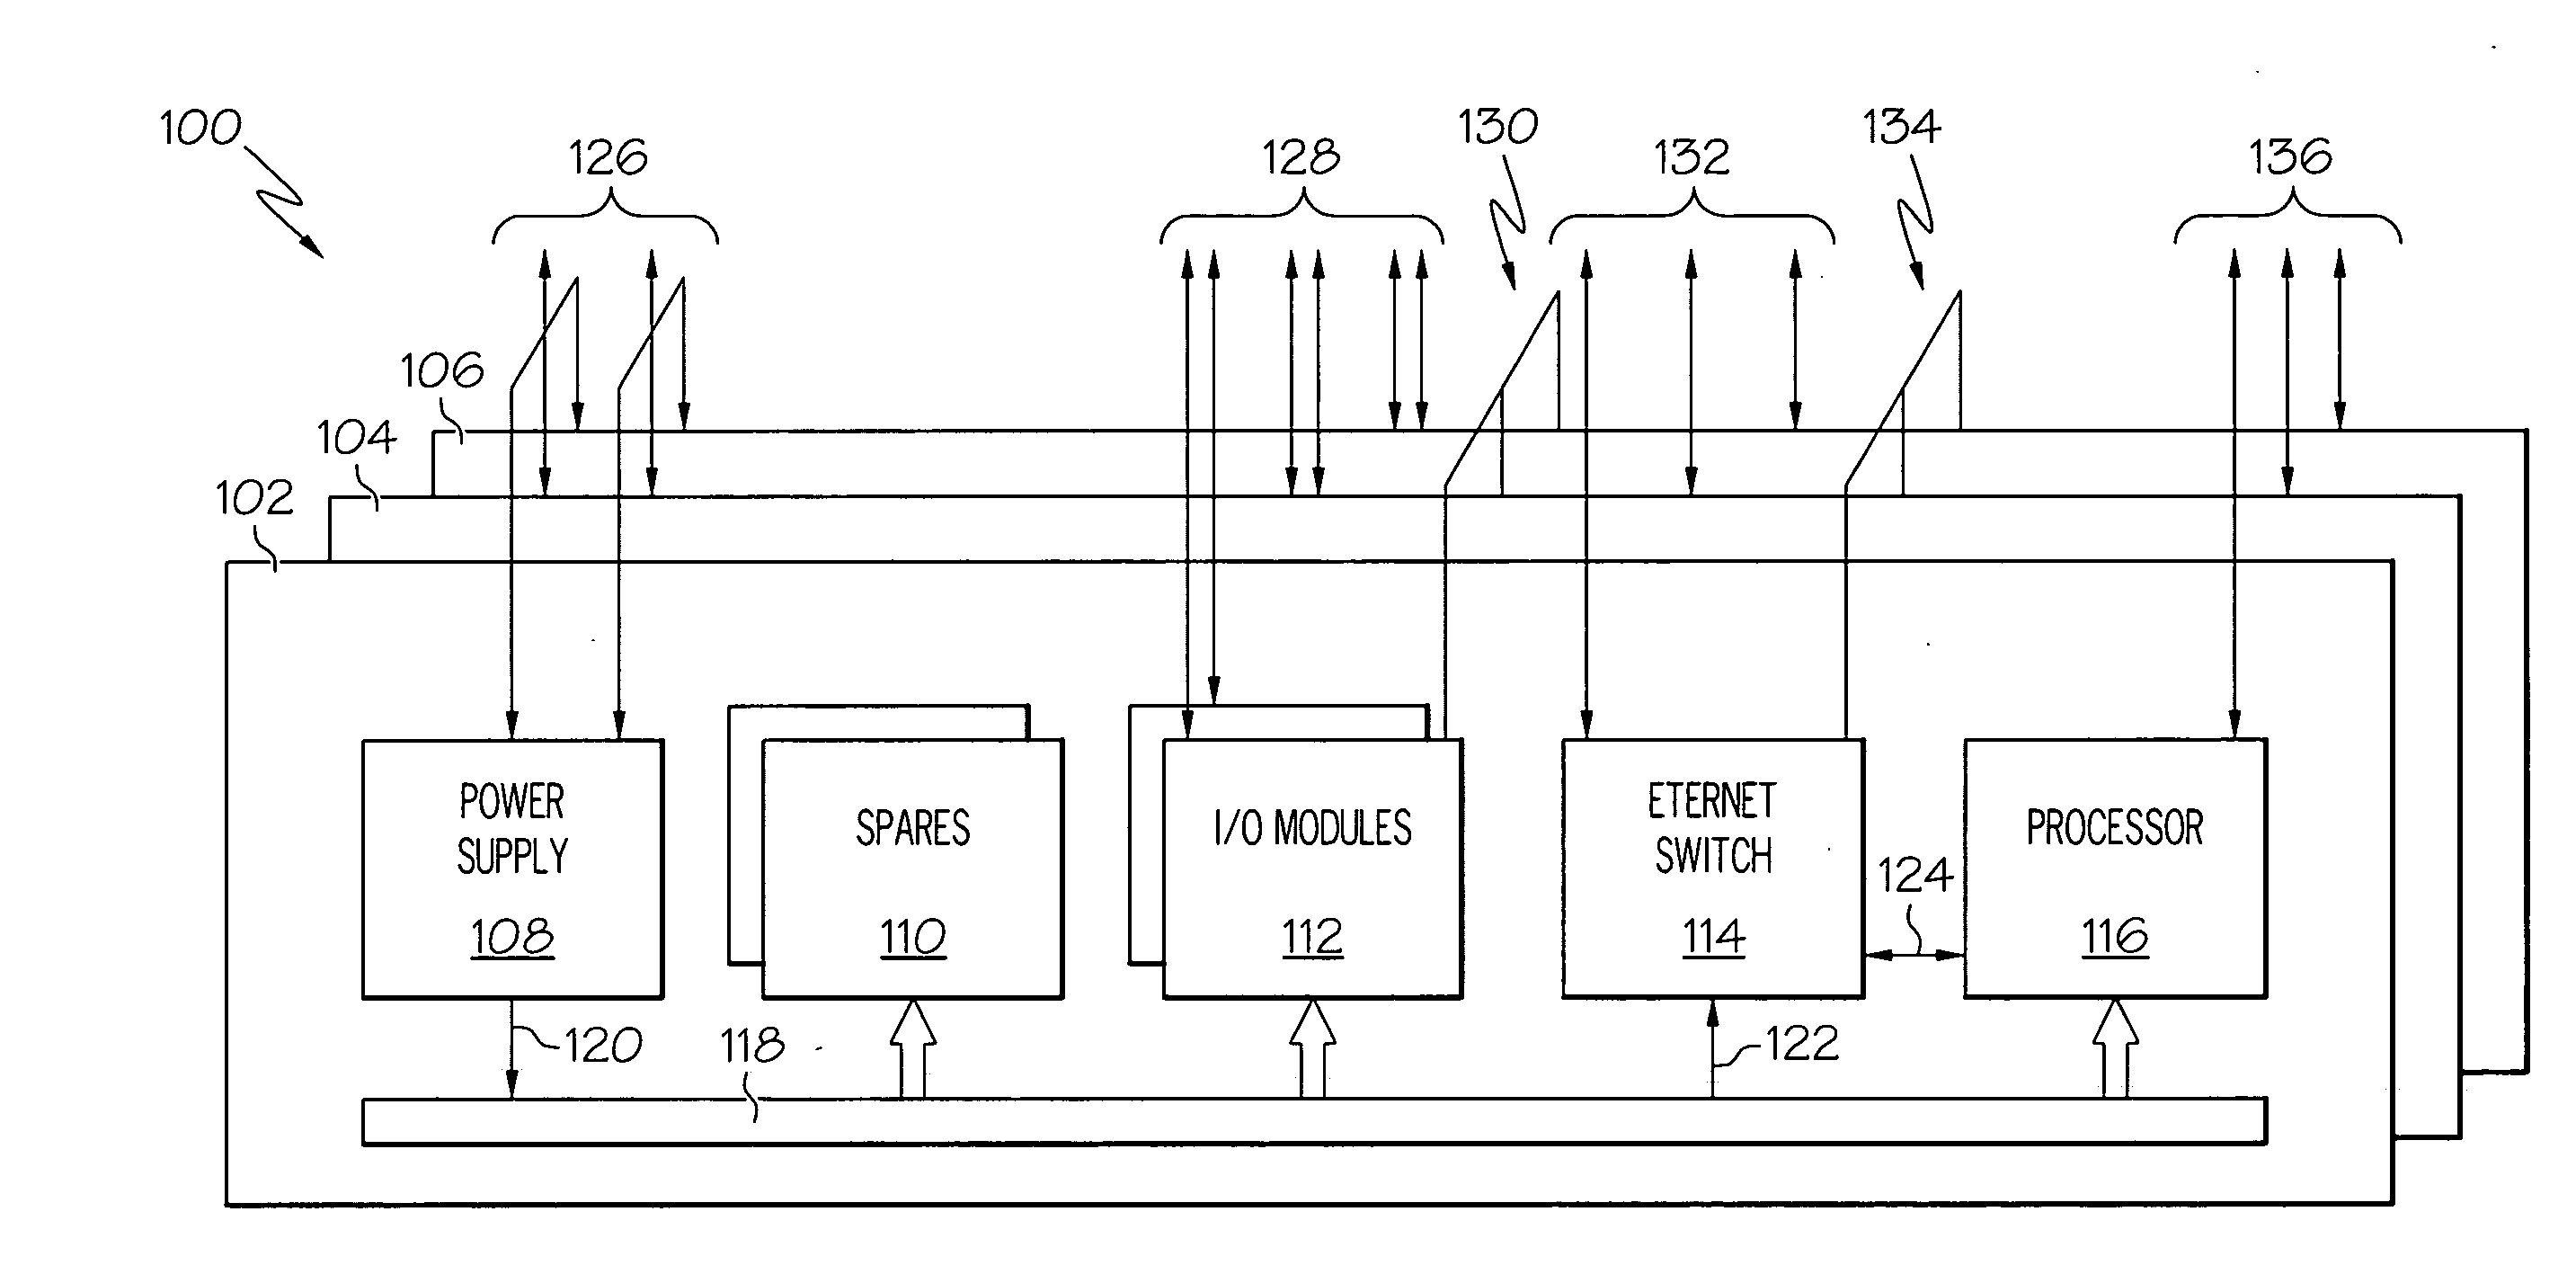 Flight control computers with ethernet based cross channel data links